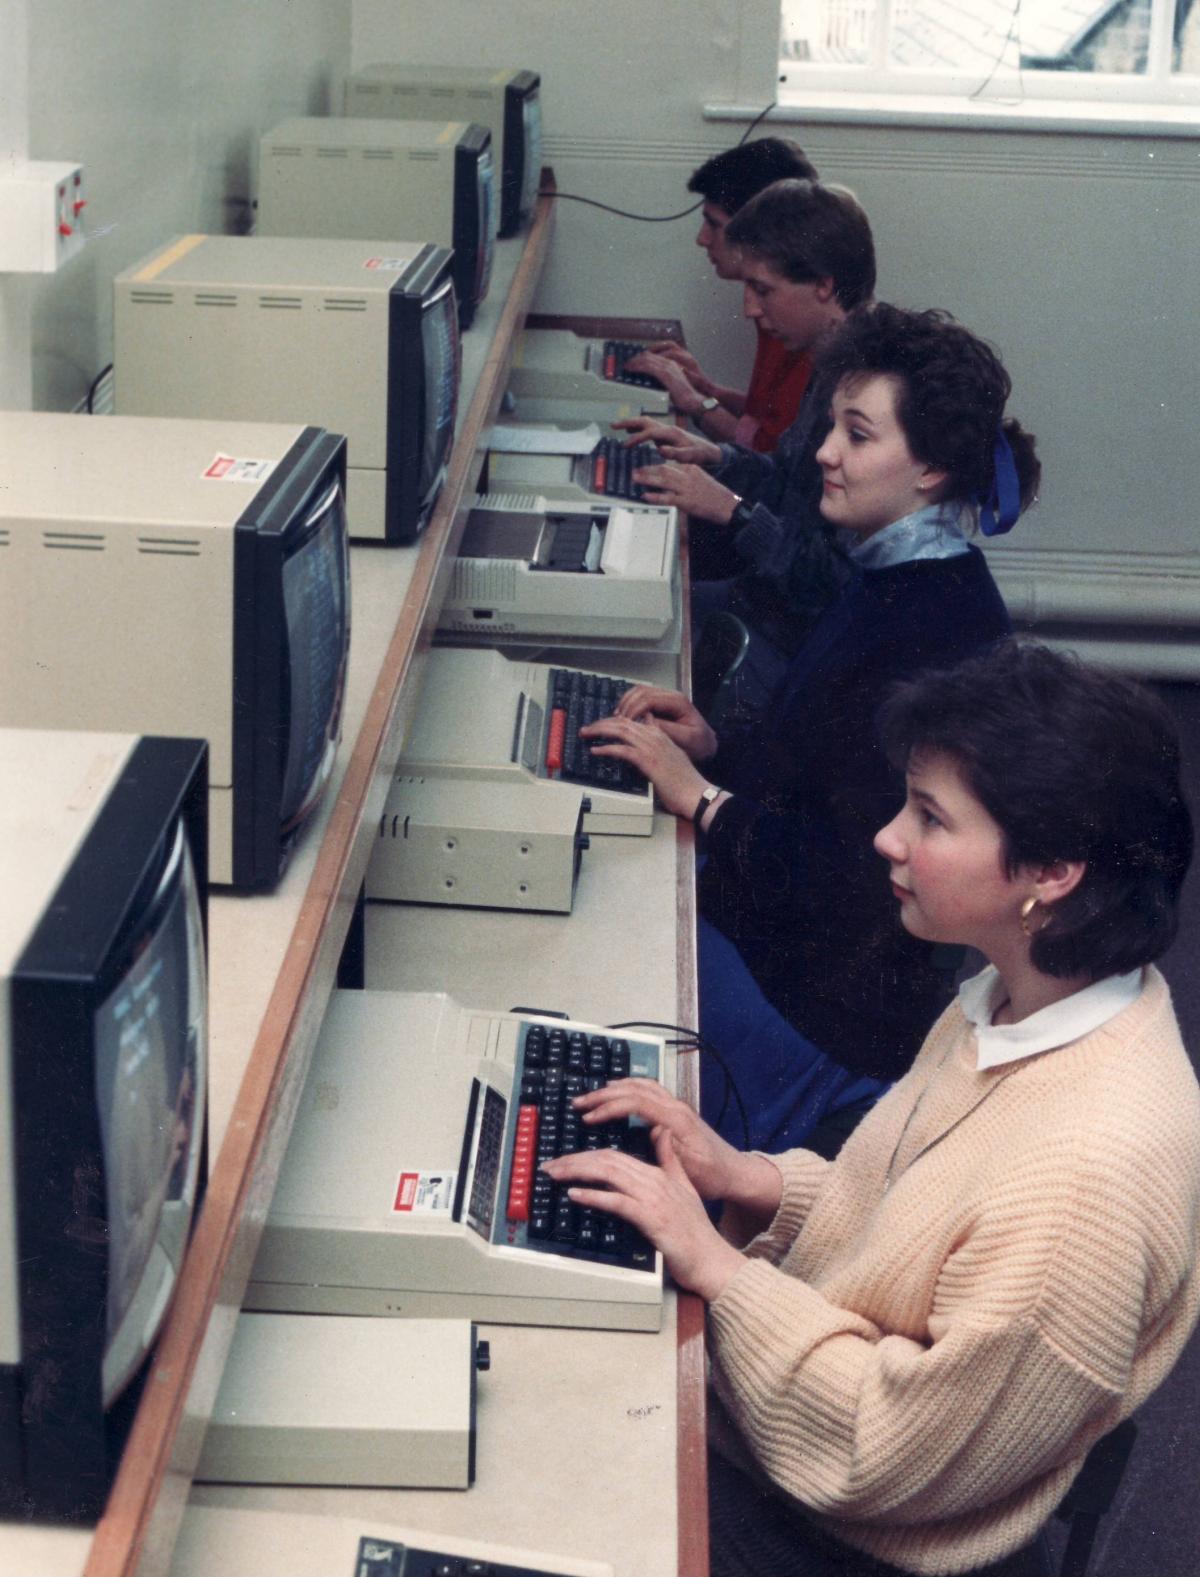 Computers classes in 1987